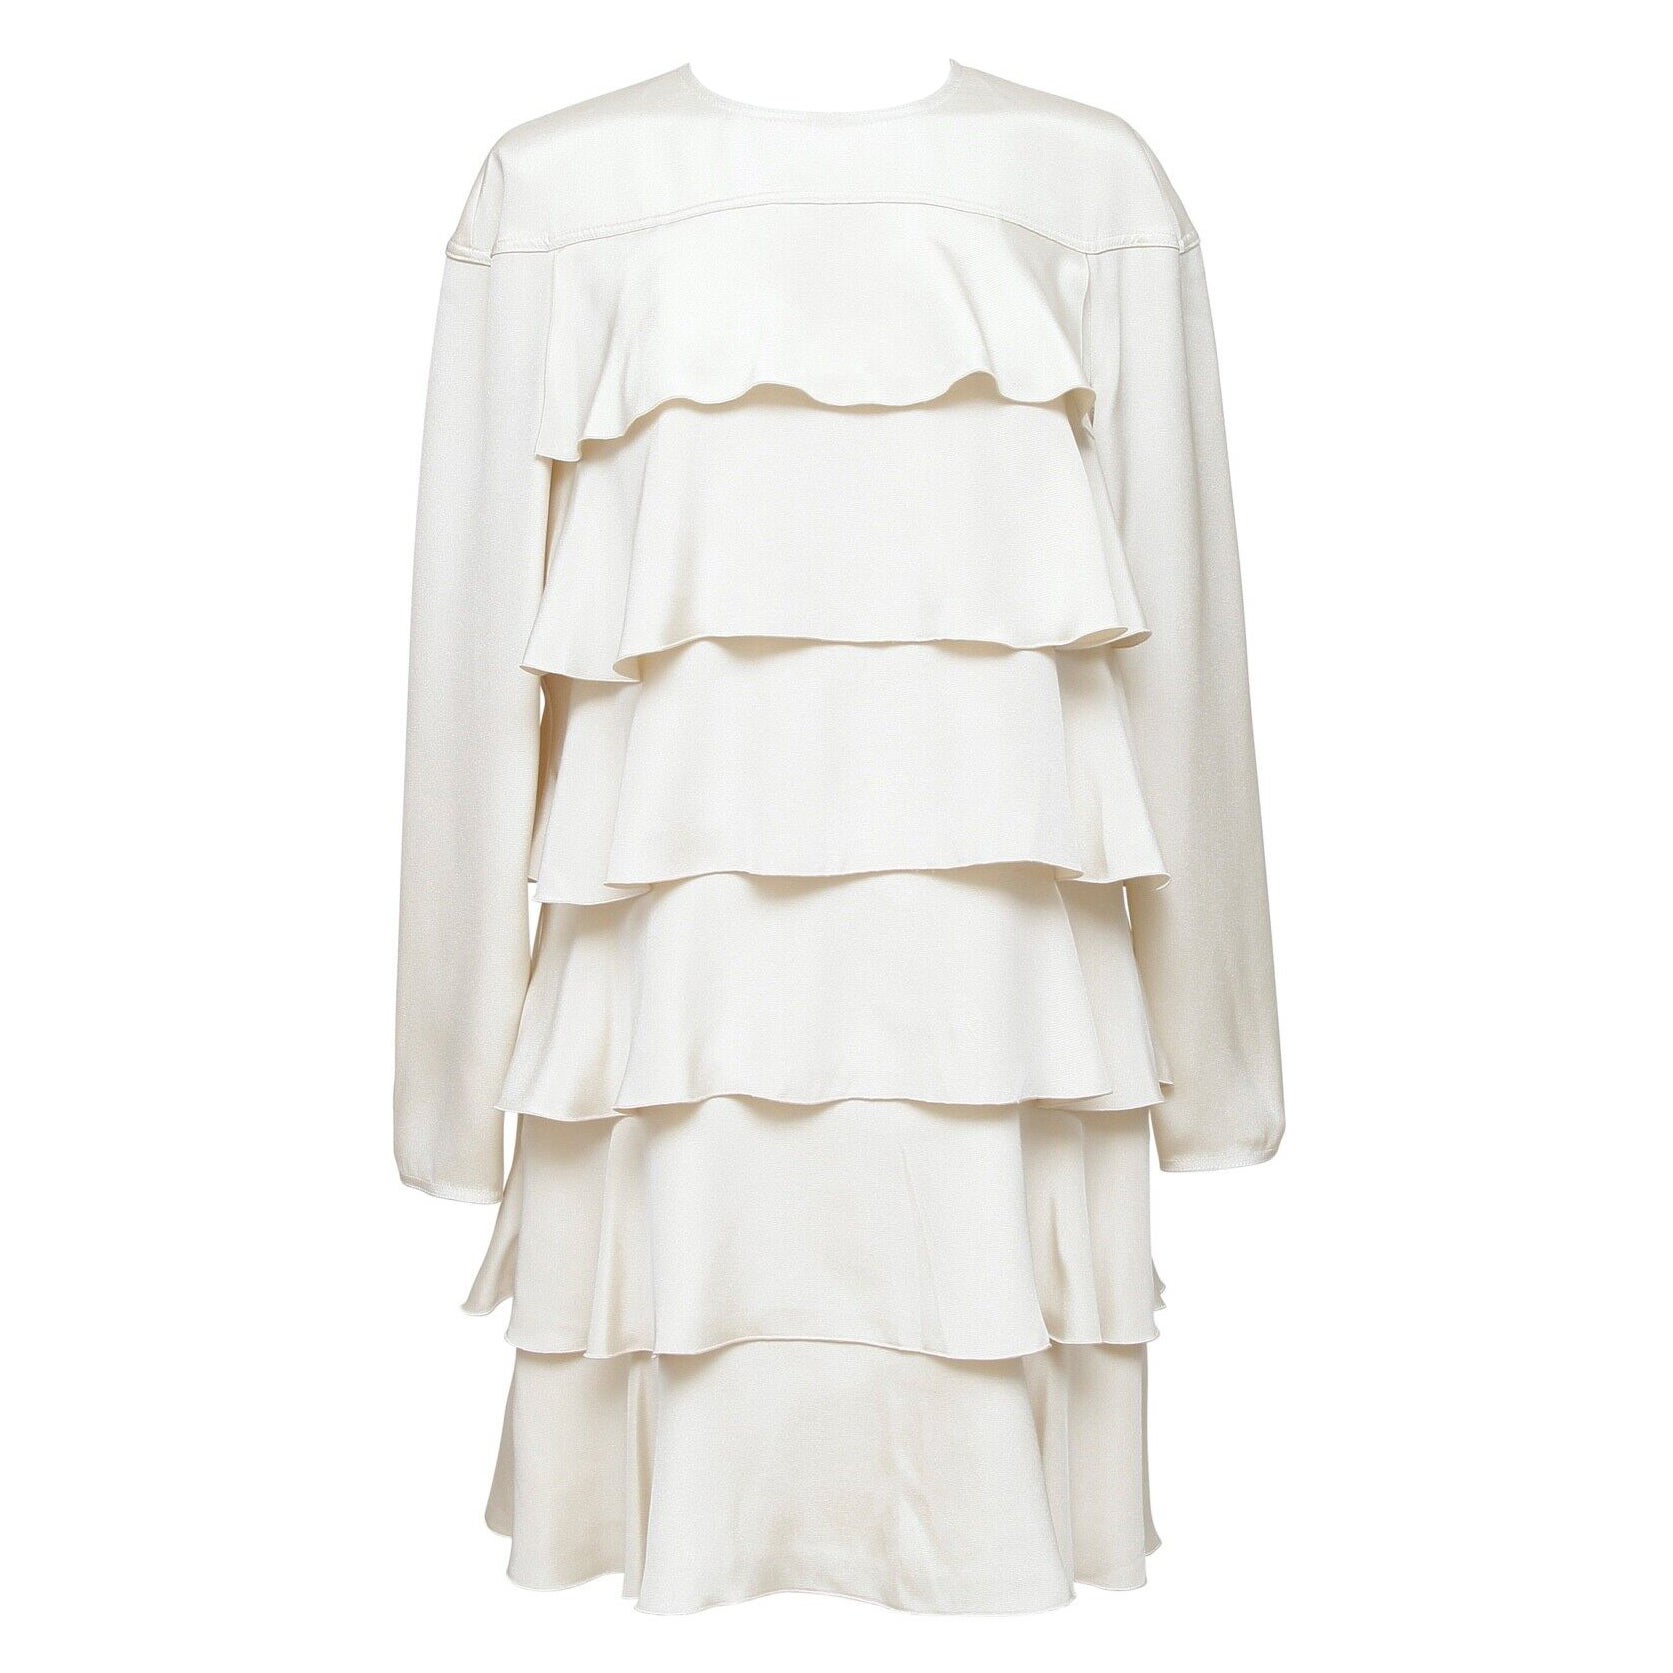 VALENTINO Ivory Dress Long Sleeve Knee Length Silk Tiered Crew Neck Sz 6 For Sale